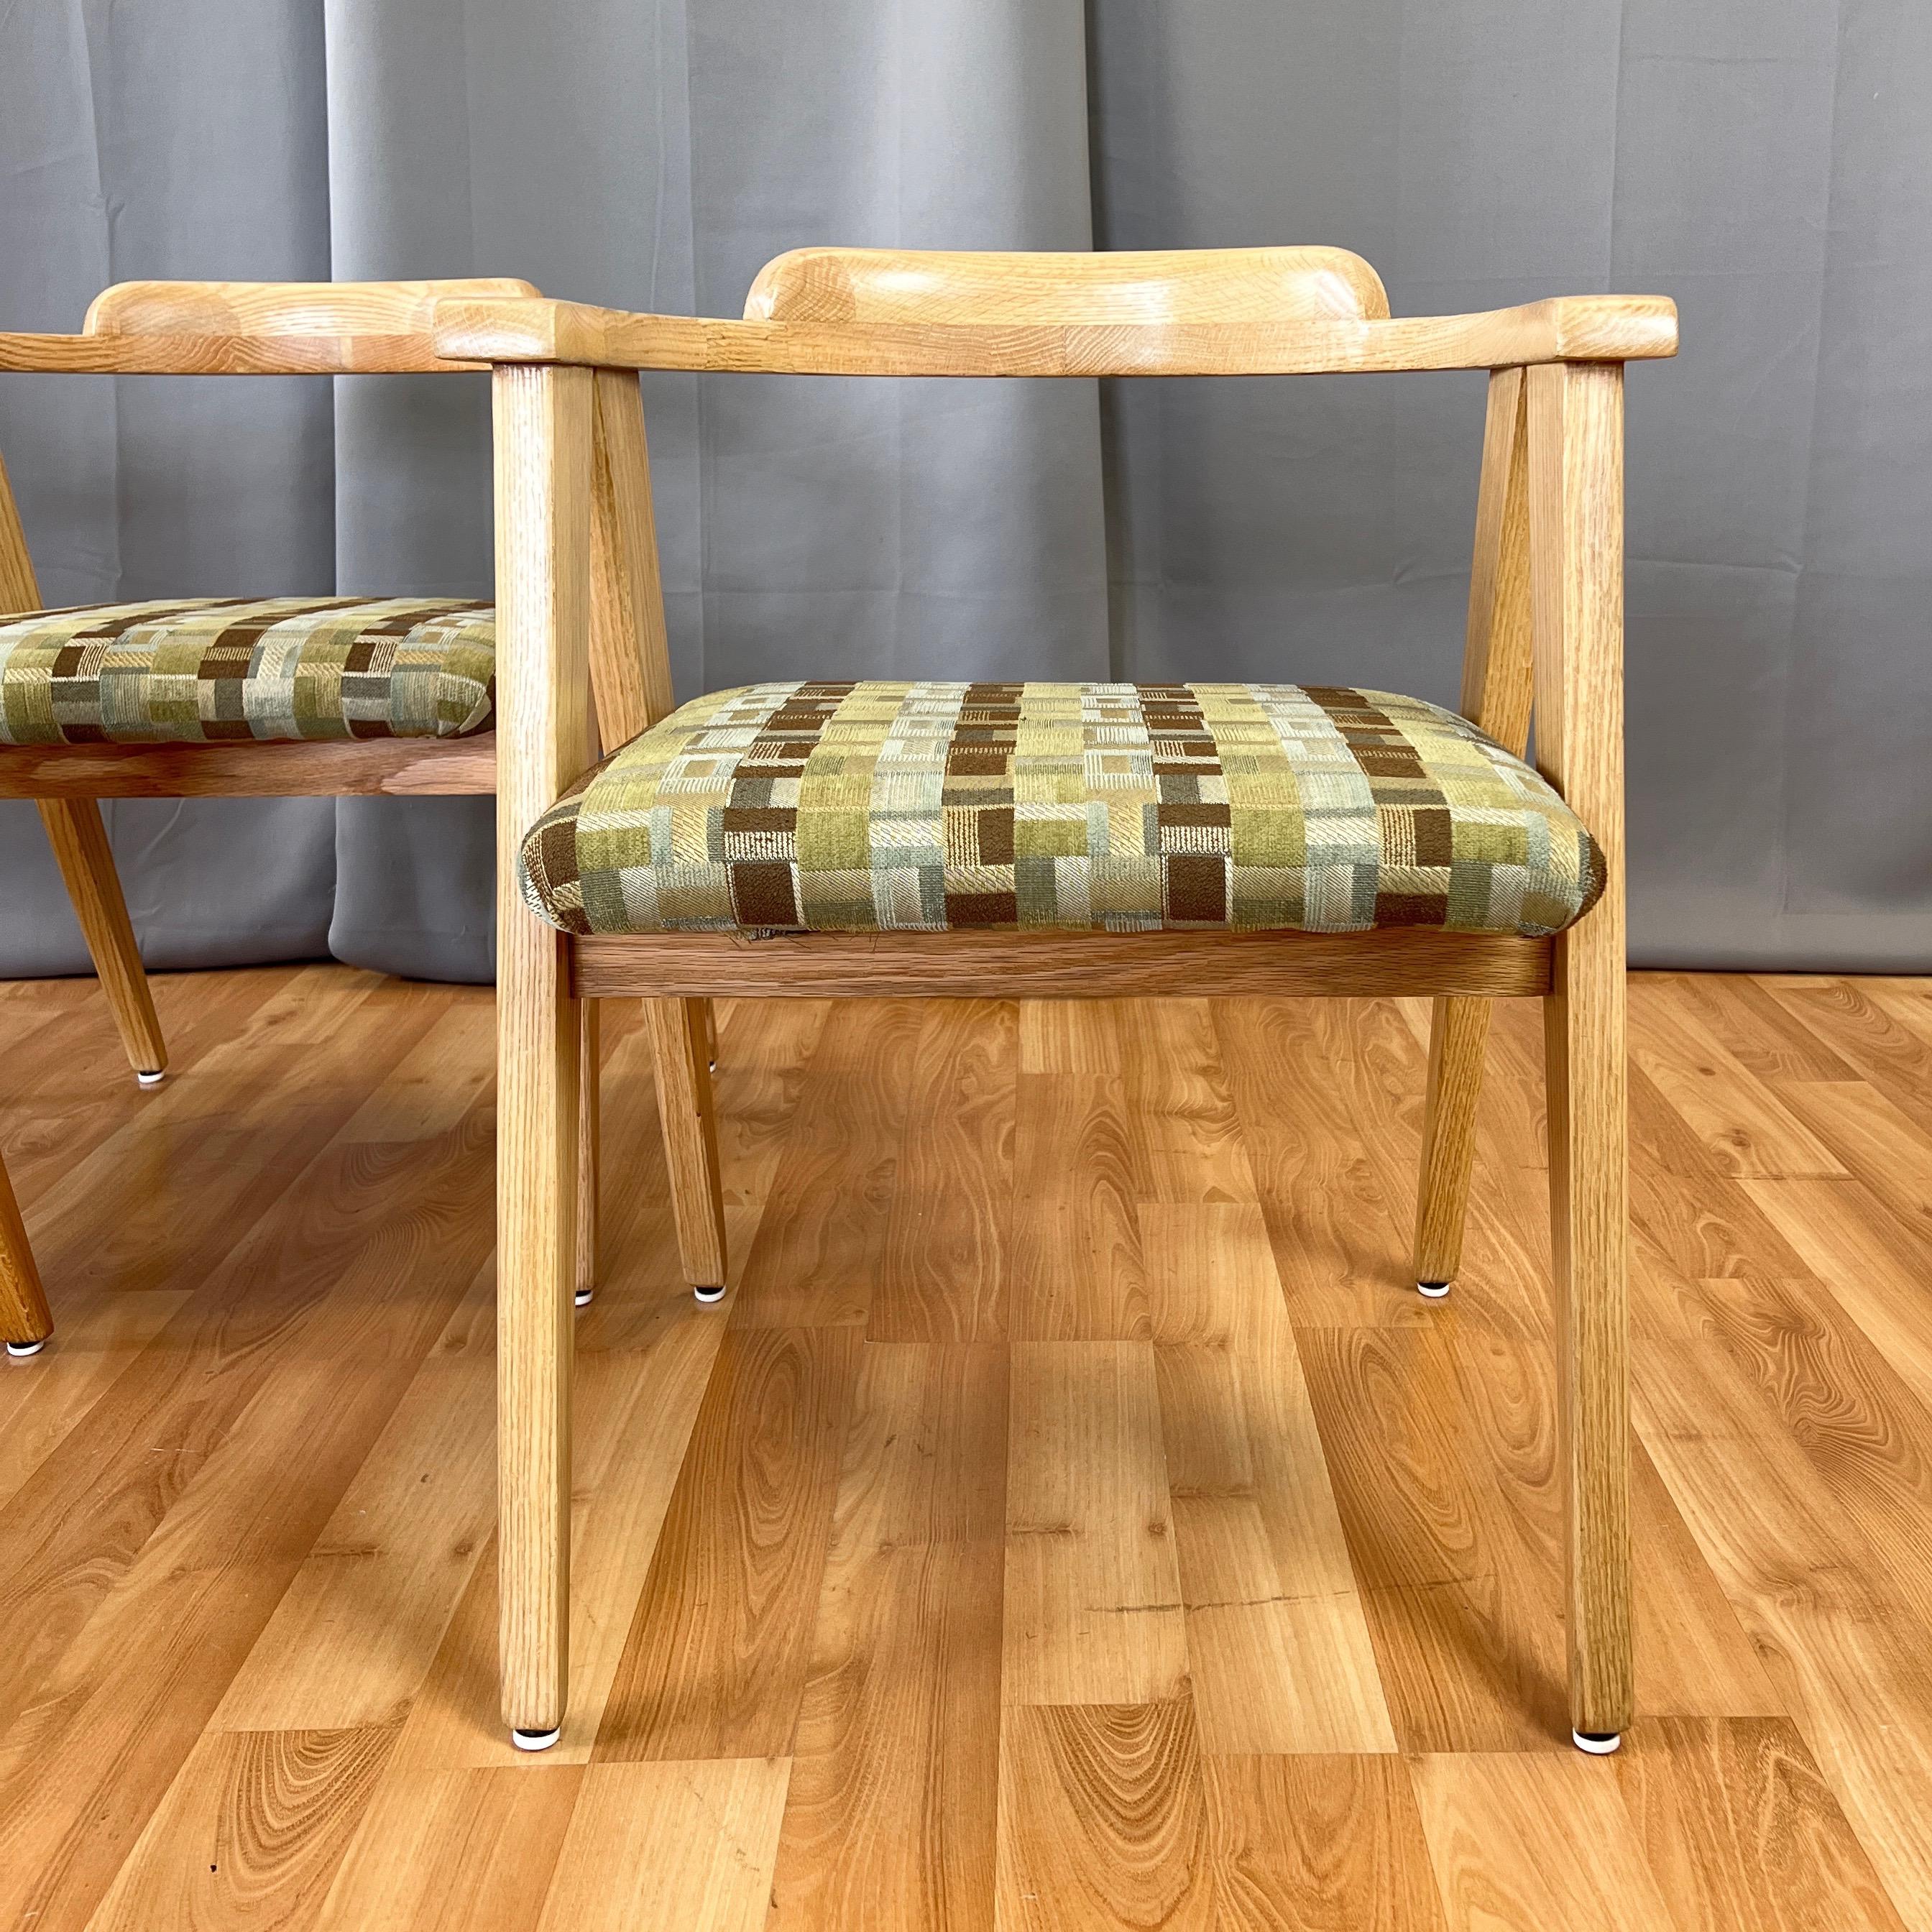 American Set of Four Indiana Chair Co. Live Oak Compass Leg Dining Chairs, Early 1950s For Sale